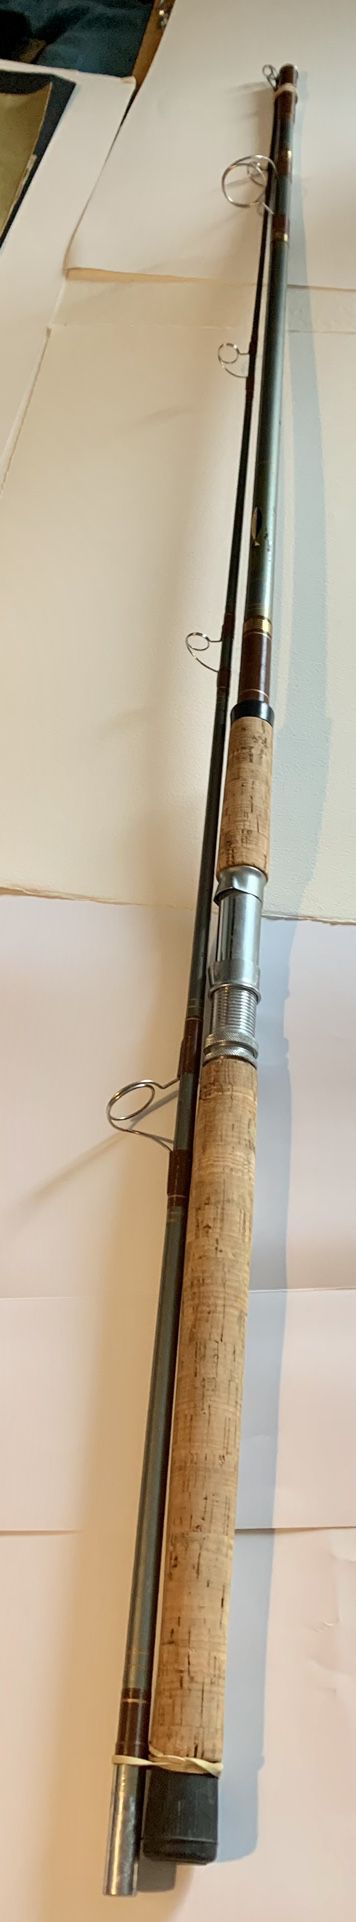 Vintage Roddymatic 9’ foot Surfcasting Rod 910 N , 2 piece Made in USA, list price 24.95 Long Cork grips and eyelets are in VG condition